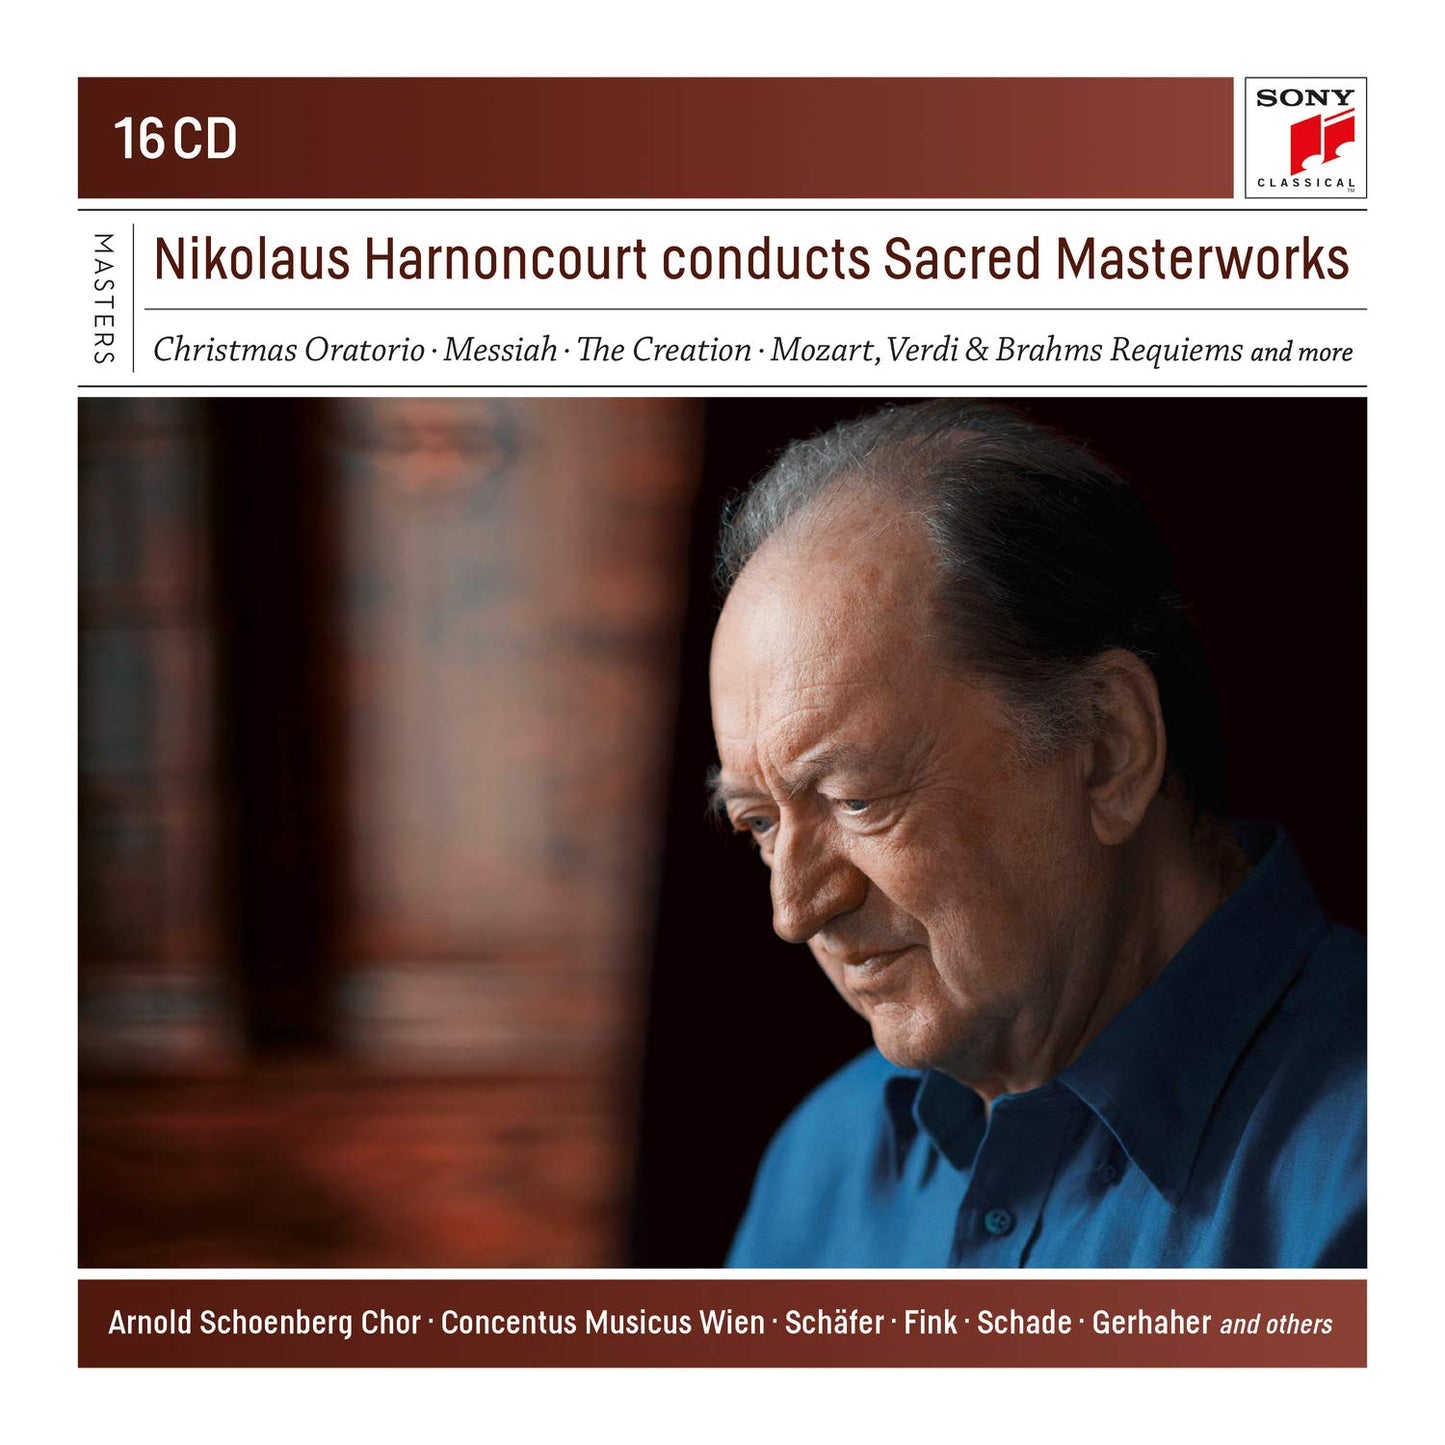 HARNONCOURT CONDUCTS SACRED MASTERPIECES (16 CDS)